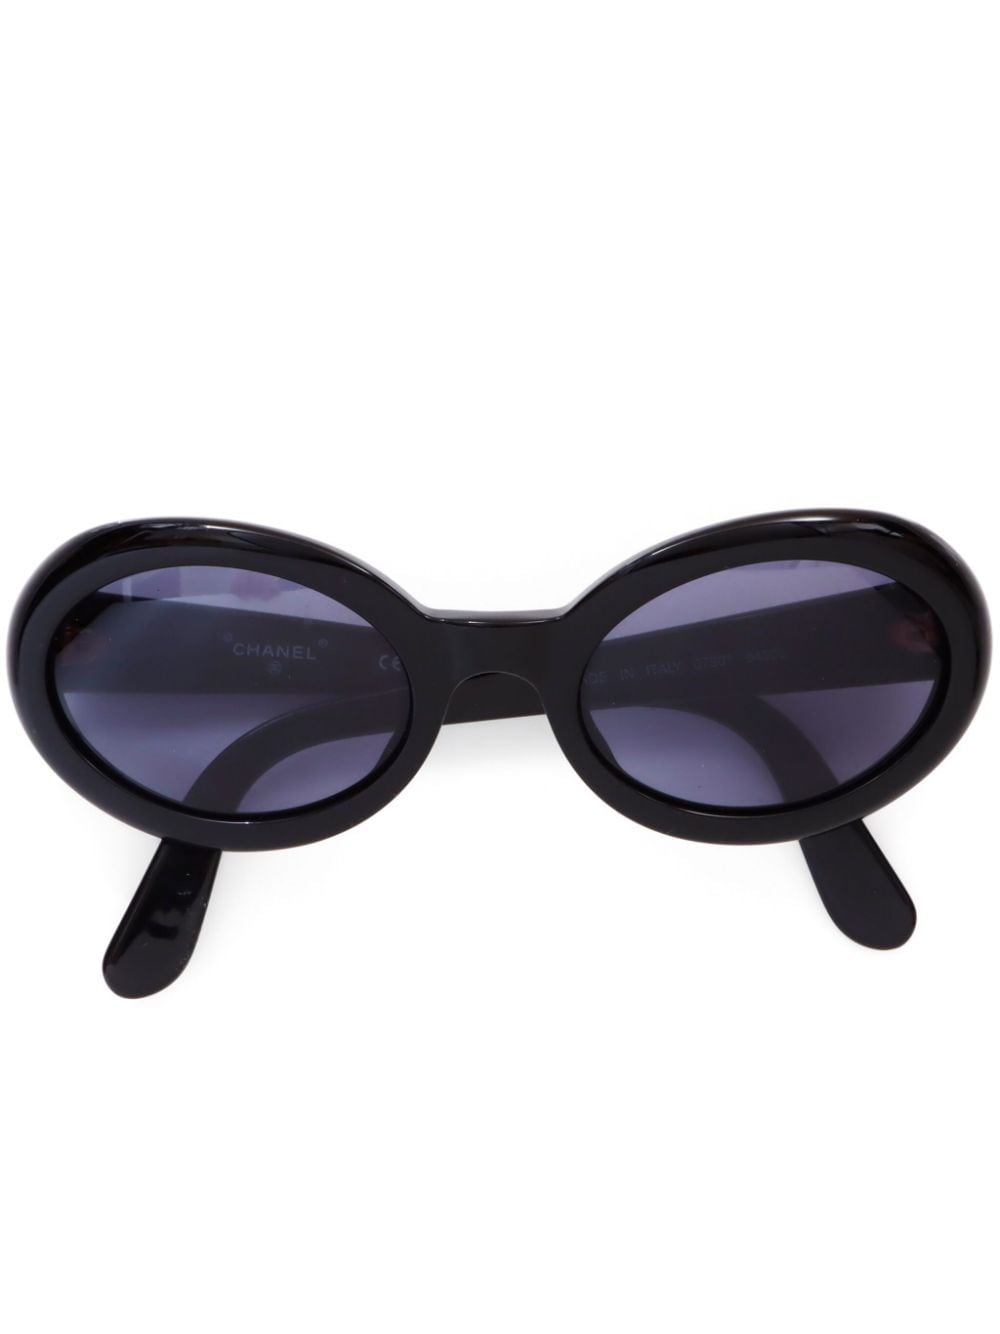 CHANEL Pre-Owned CC oval-framed sunglasses - Black